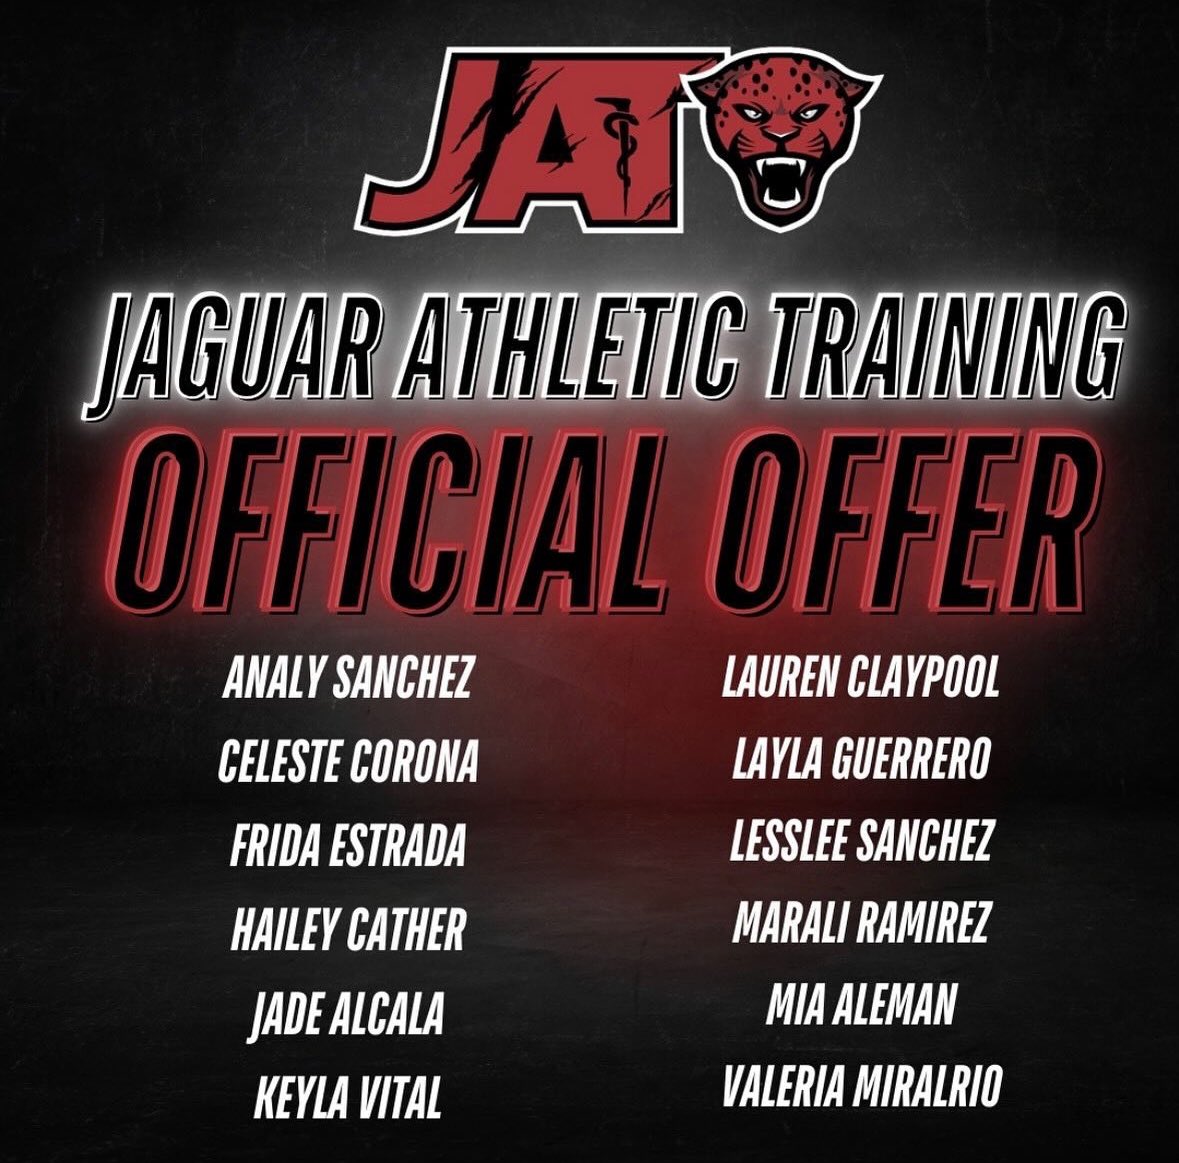 OFFERS HAVE BEEN SENT OUT!!Congratulations to our incoming #JATS class!! We are so excited to have y’all join our family & can’t wait to see all the amazing work y’all will do! #THEStandard #JFL #AthleticTraining